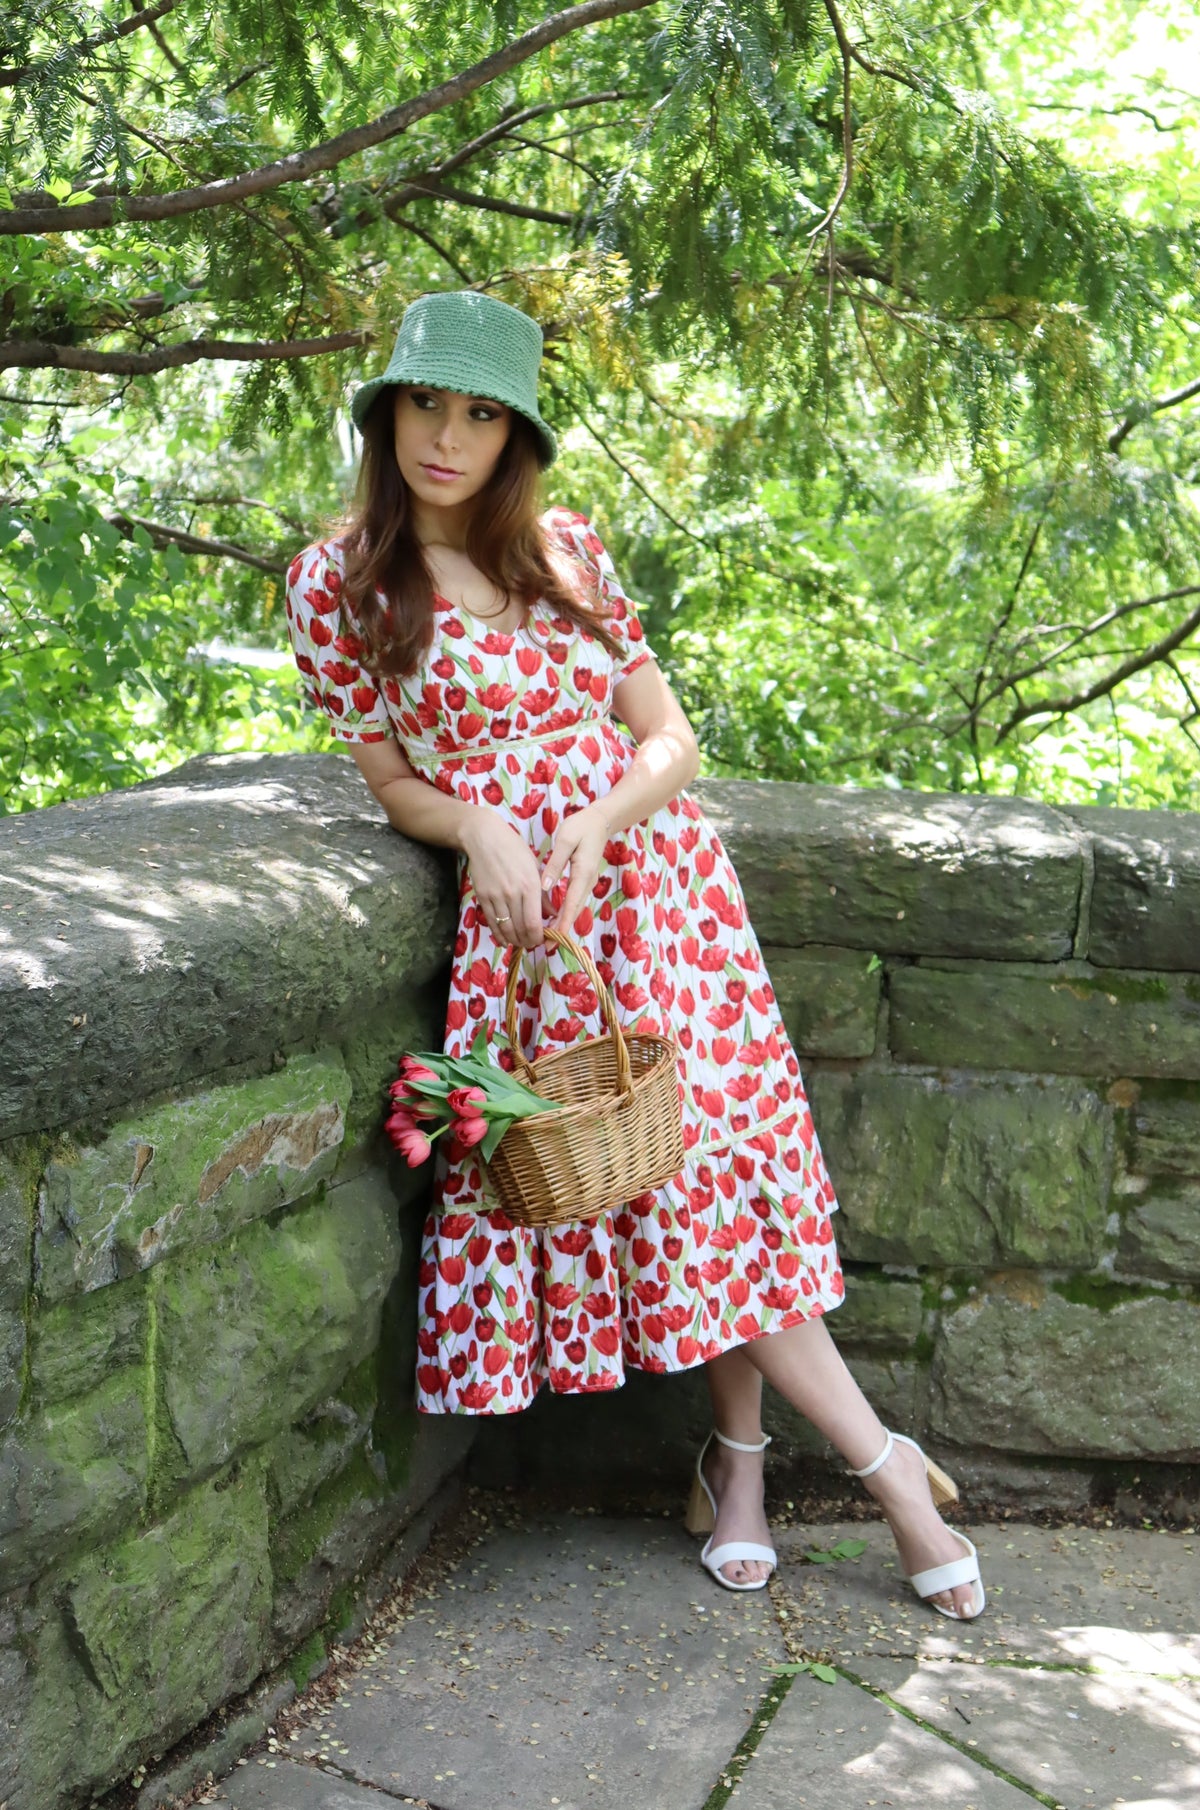 Model wearing midi length dress with a tulip print on white and wearing a green hat leaning on a stone wall.